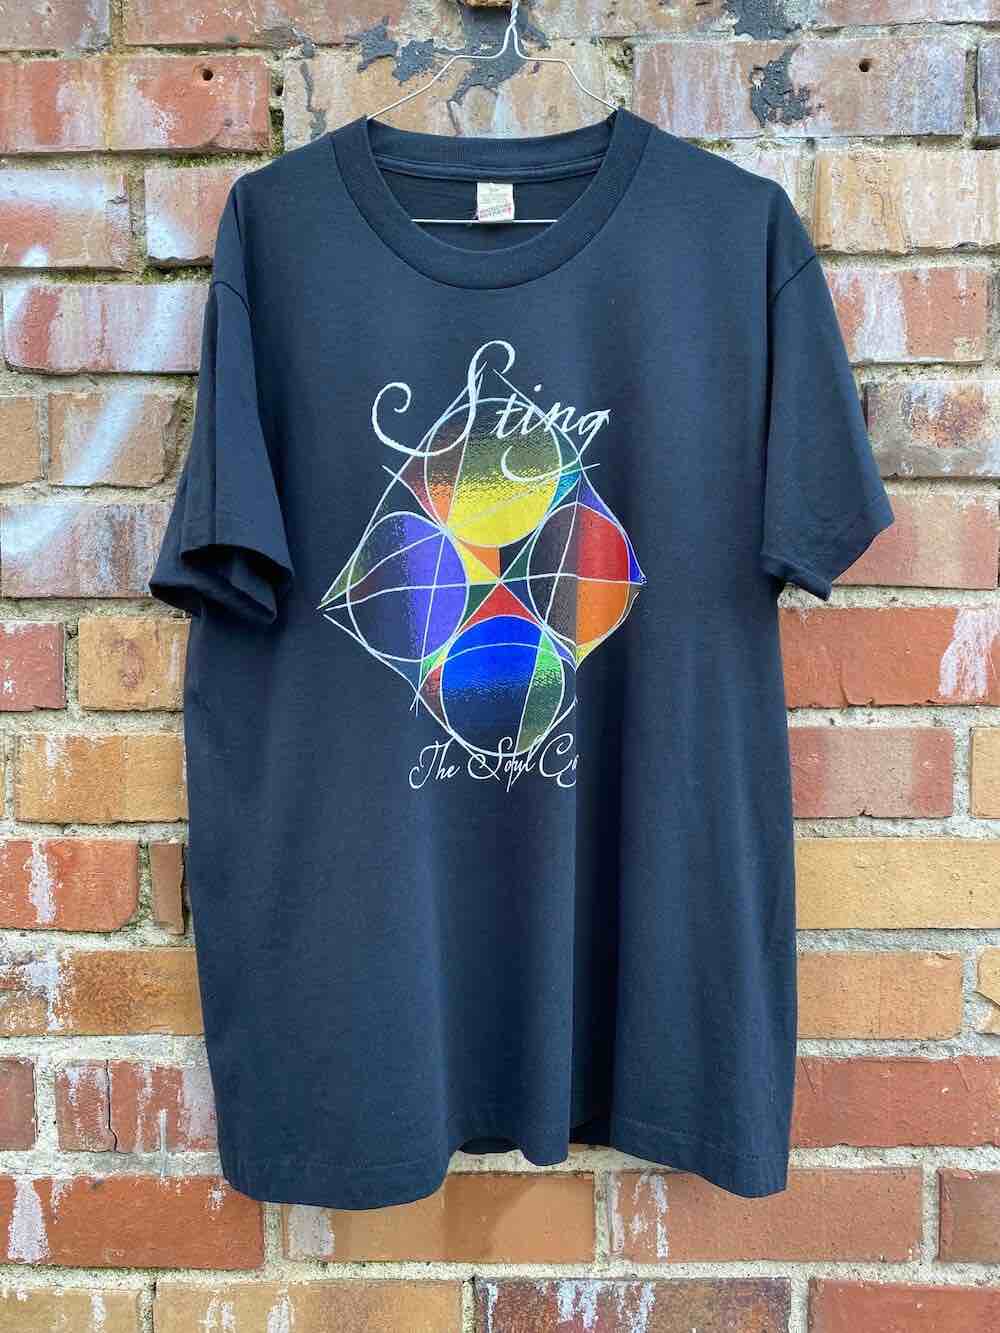 1991Sting “The Soul Cages” band tee USA製 - Tシャツ/カットソー ...